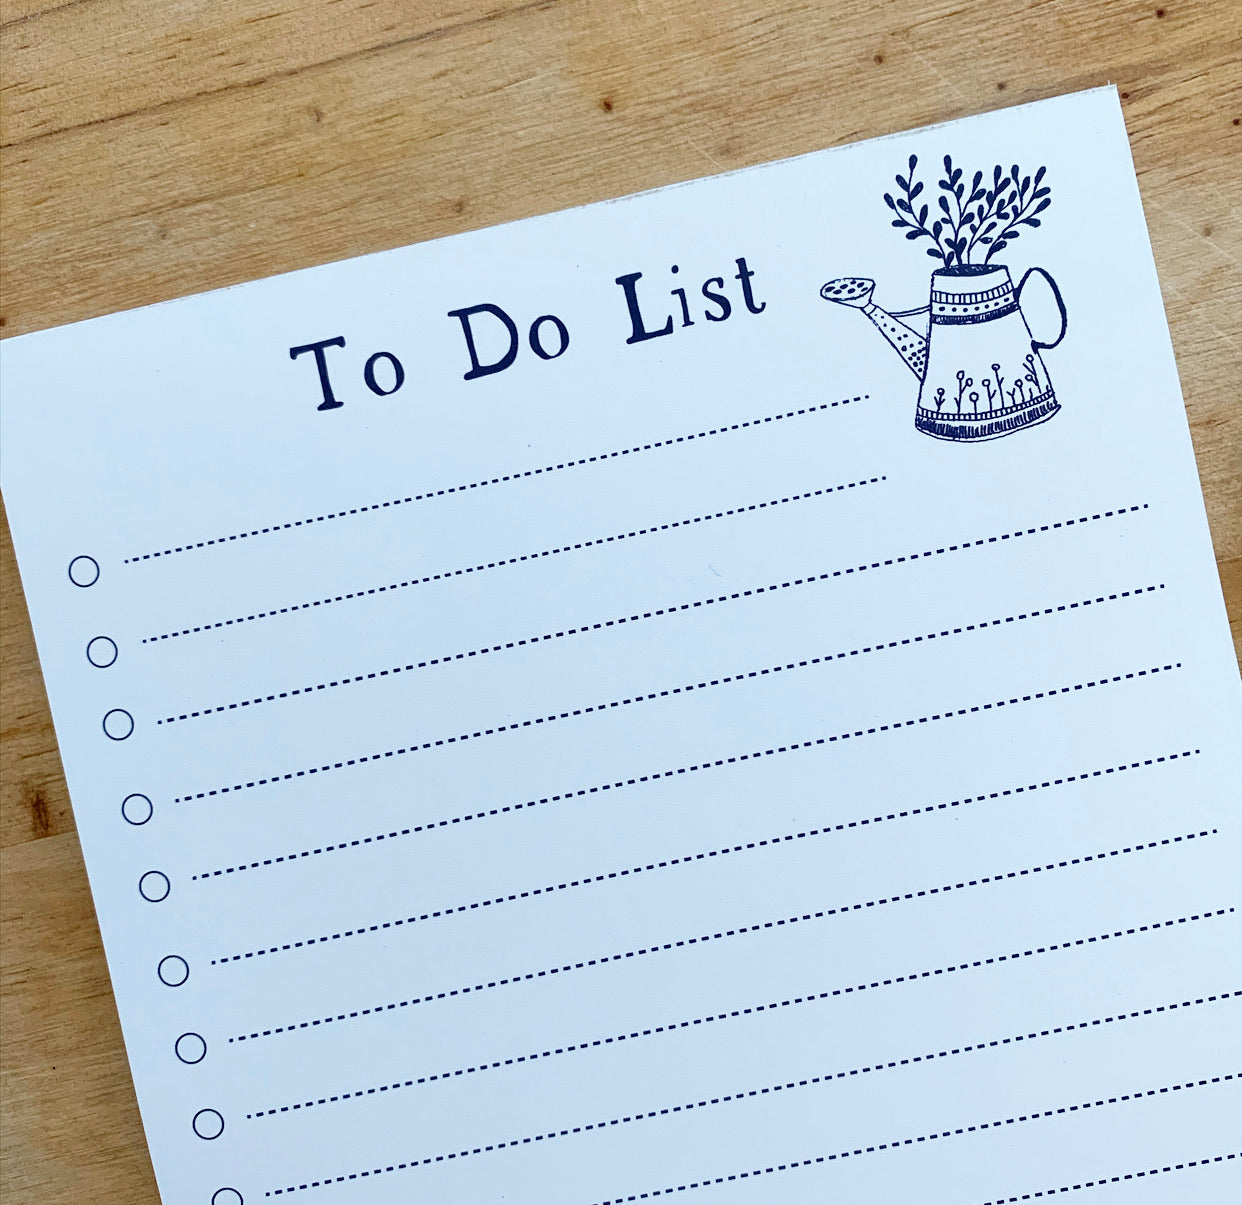 Market 'To Do List' A5 Notepad